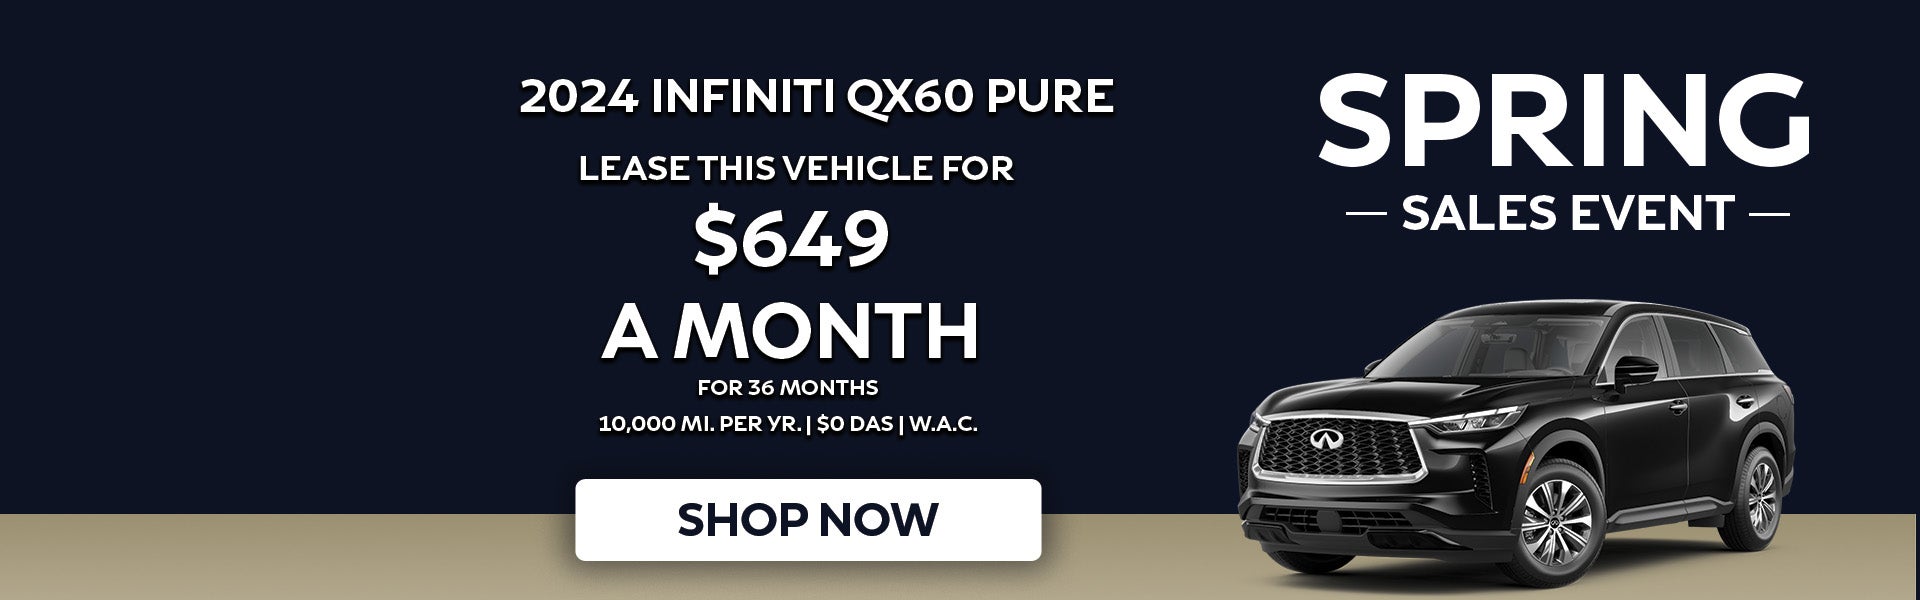 2024 INFINITI QX60 Pure Lease Special Offer